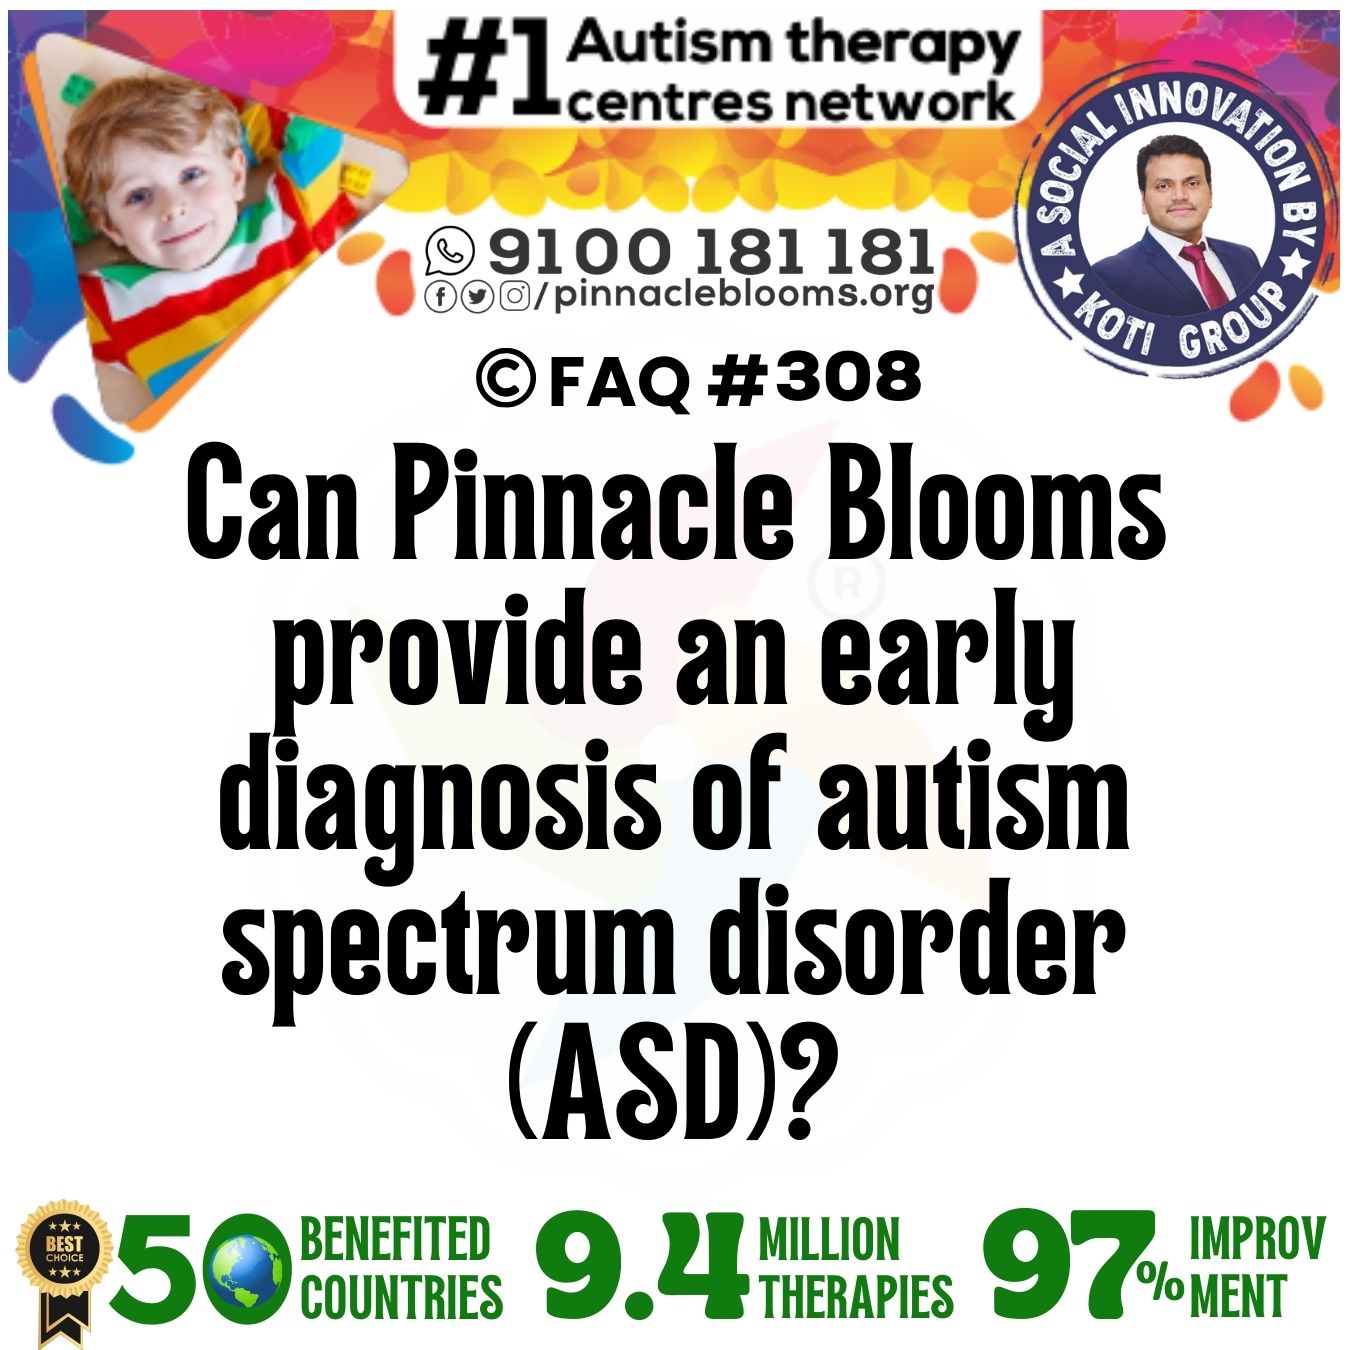 Can Pinnacle Blooms provide an early diagnosis of autism spectrum disorder (ASD)?